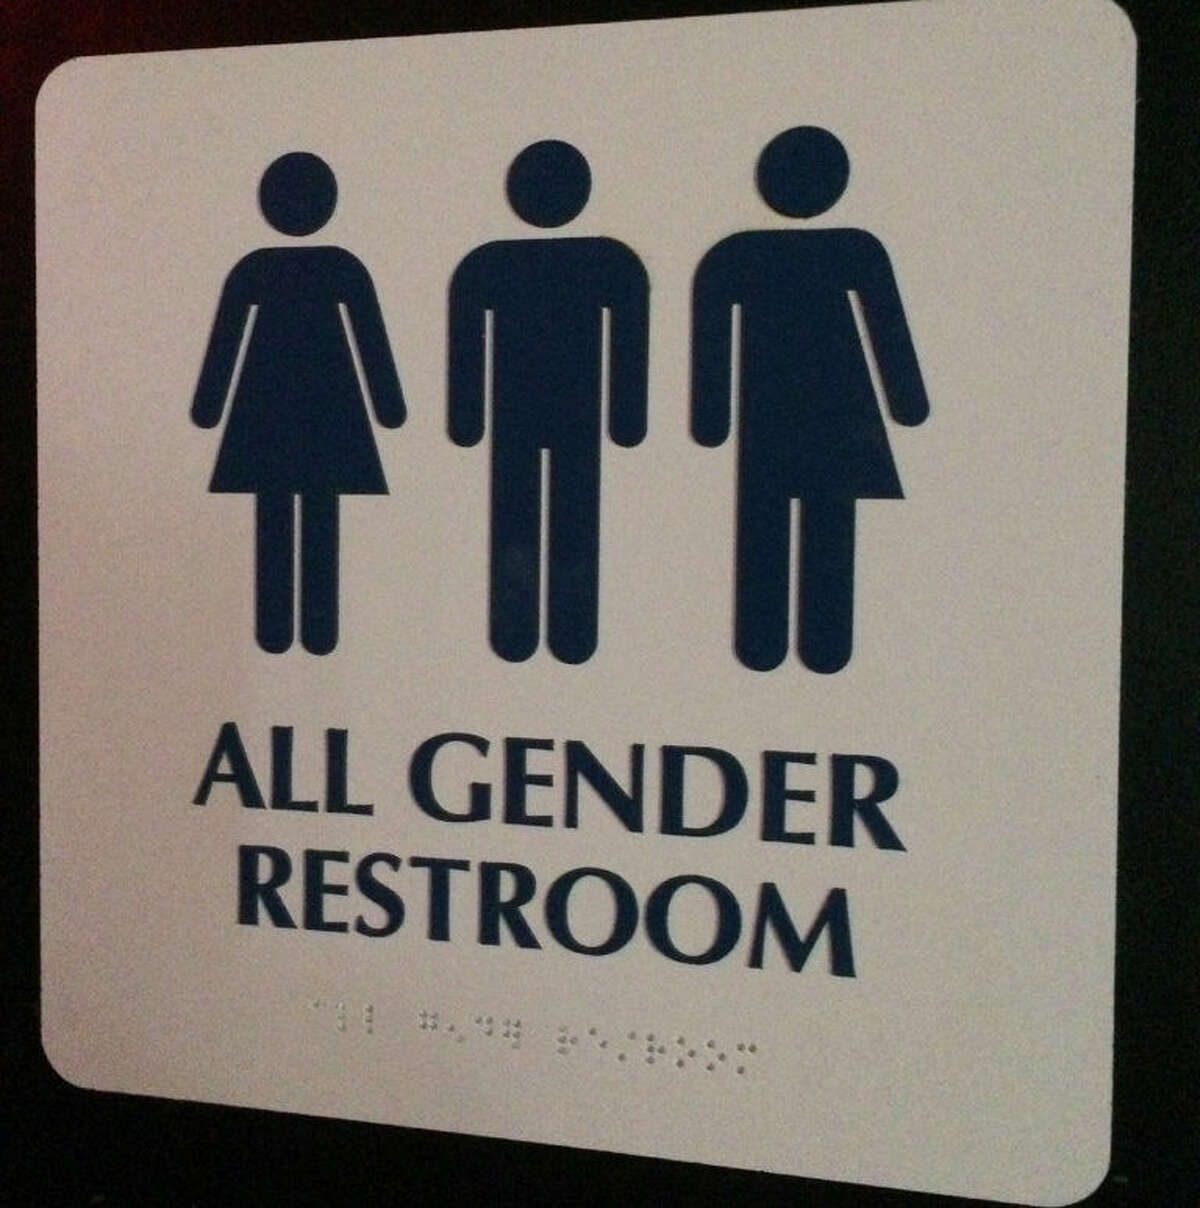 This May 11, 2014 photo shows an "All Gender Restroom" sign outside a bathroom in a bar in Washington. Confrontations have flared across the country over whether to protect or curtail the right of transgender people to use public restrooms in accordance with their gender identity. (AP Photo)